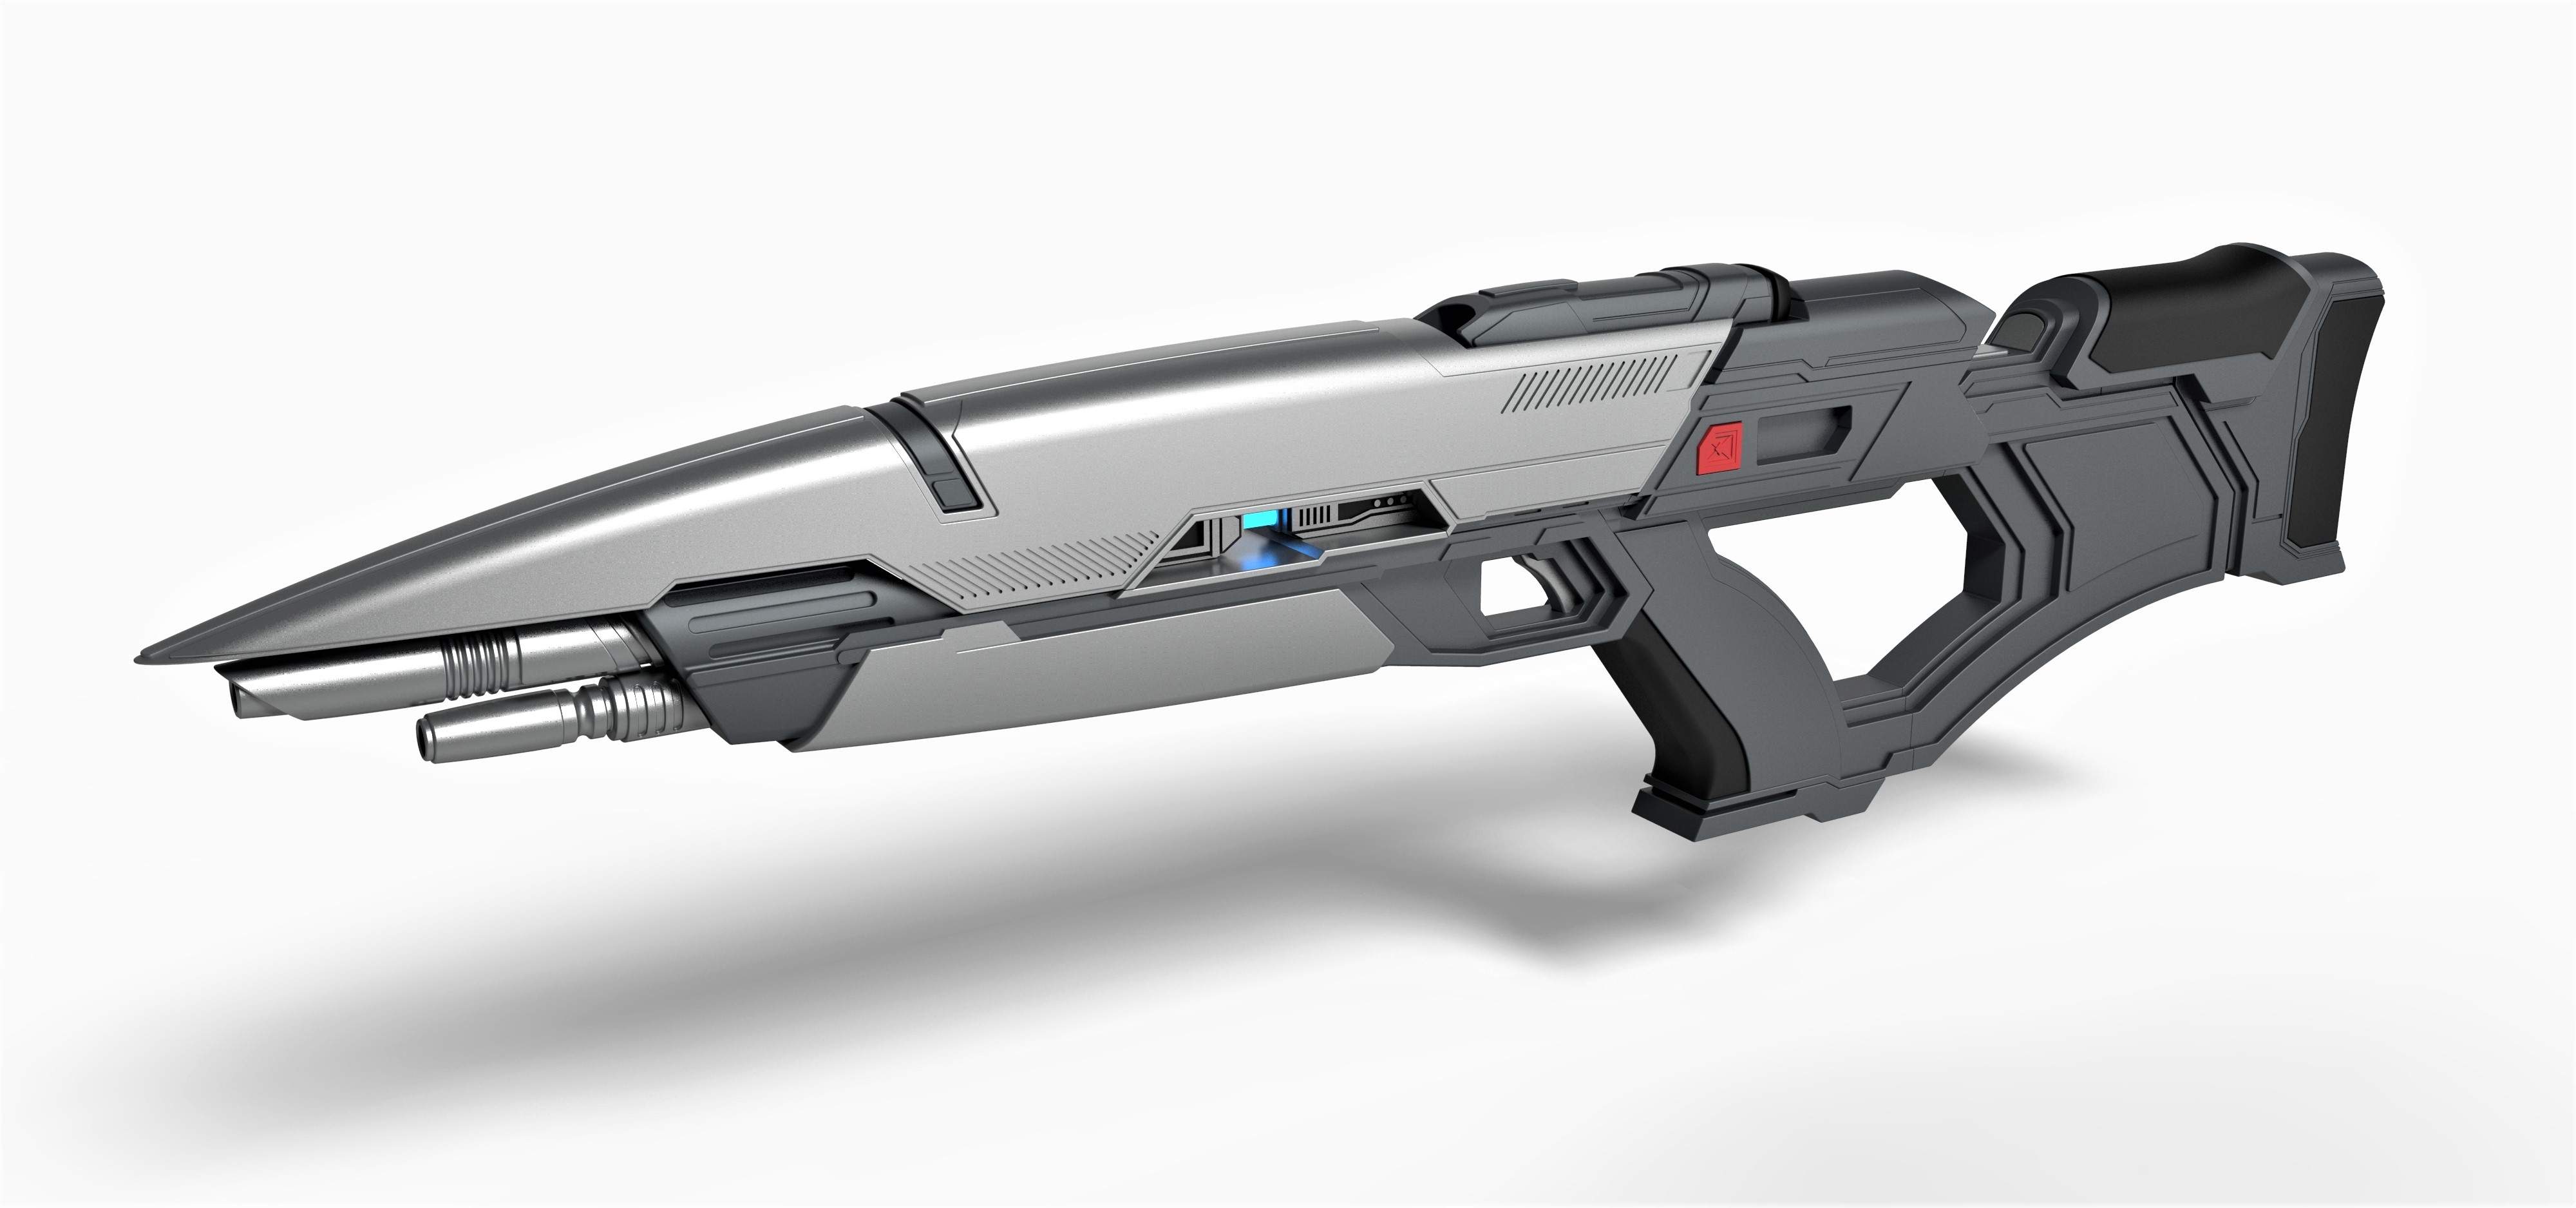 Phaser Rifle from Star Trek Into Darkness Print Ready 3D Model